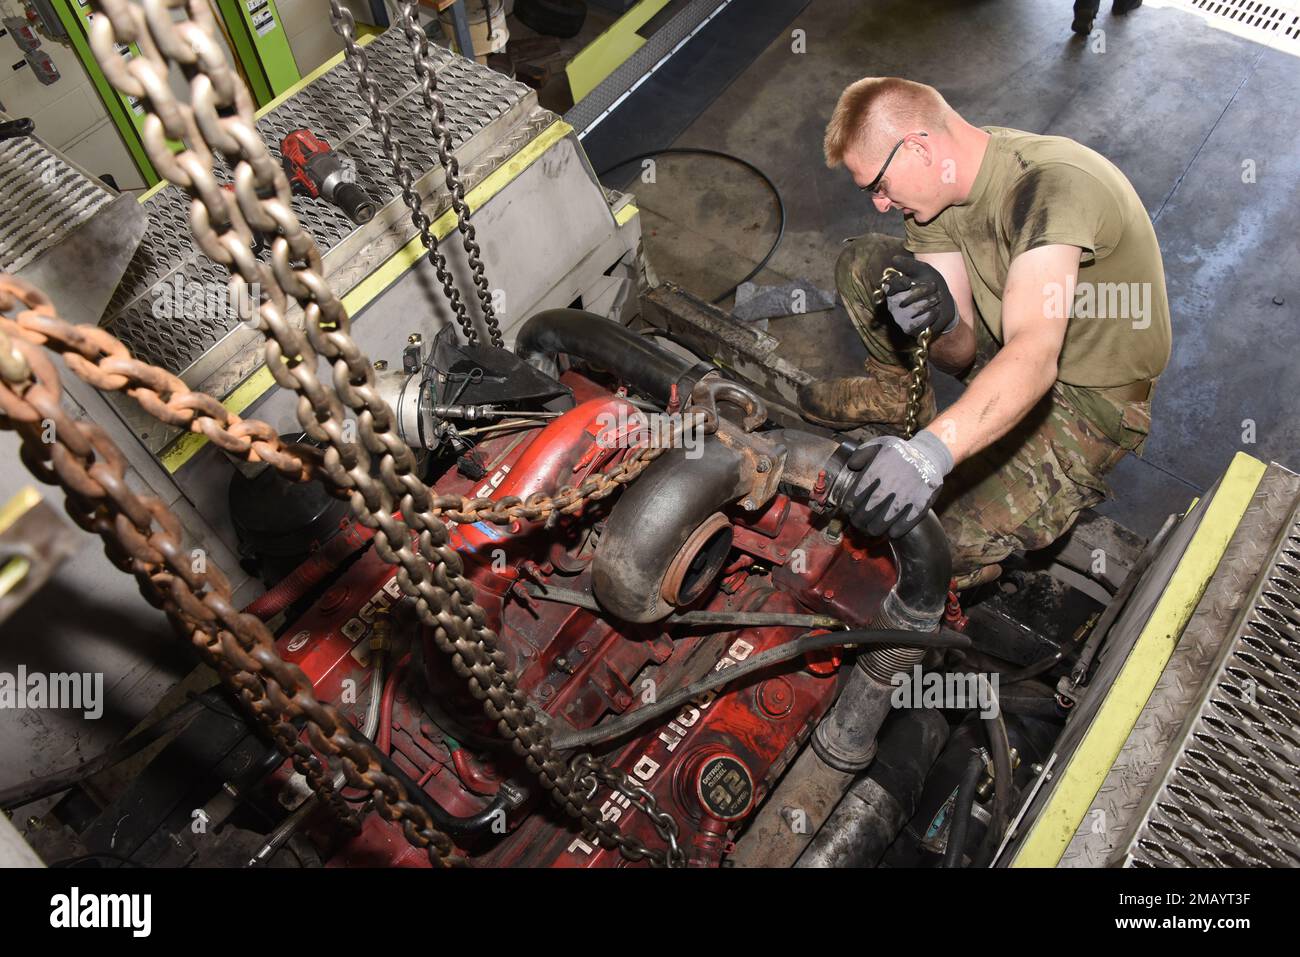 185th Air Refueling Wing vehicle mechanic Technical Sgt. Jason Lammers works to remove an 8 cylinder Detroit Diesel engine from the rear of a 1996 Teledyne P23 “Crash Truck” at the 185th Air Refueling Wing vehicle maintenance shop in Sioux City, Iowa on June 8, 2022. 185th ARW mechanics are overhauling the engine because it had developed an internal coolant leak.    U.S. Air National Guard photo Senior Master Sgt. Vincent De Groot Stock Photo